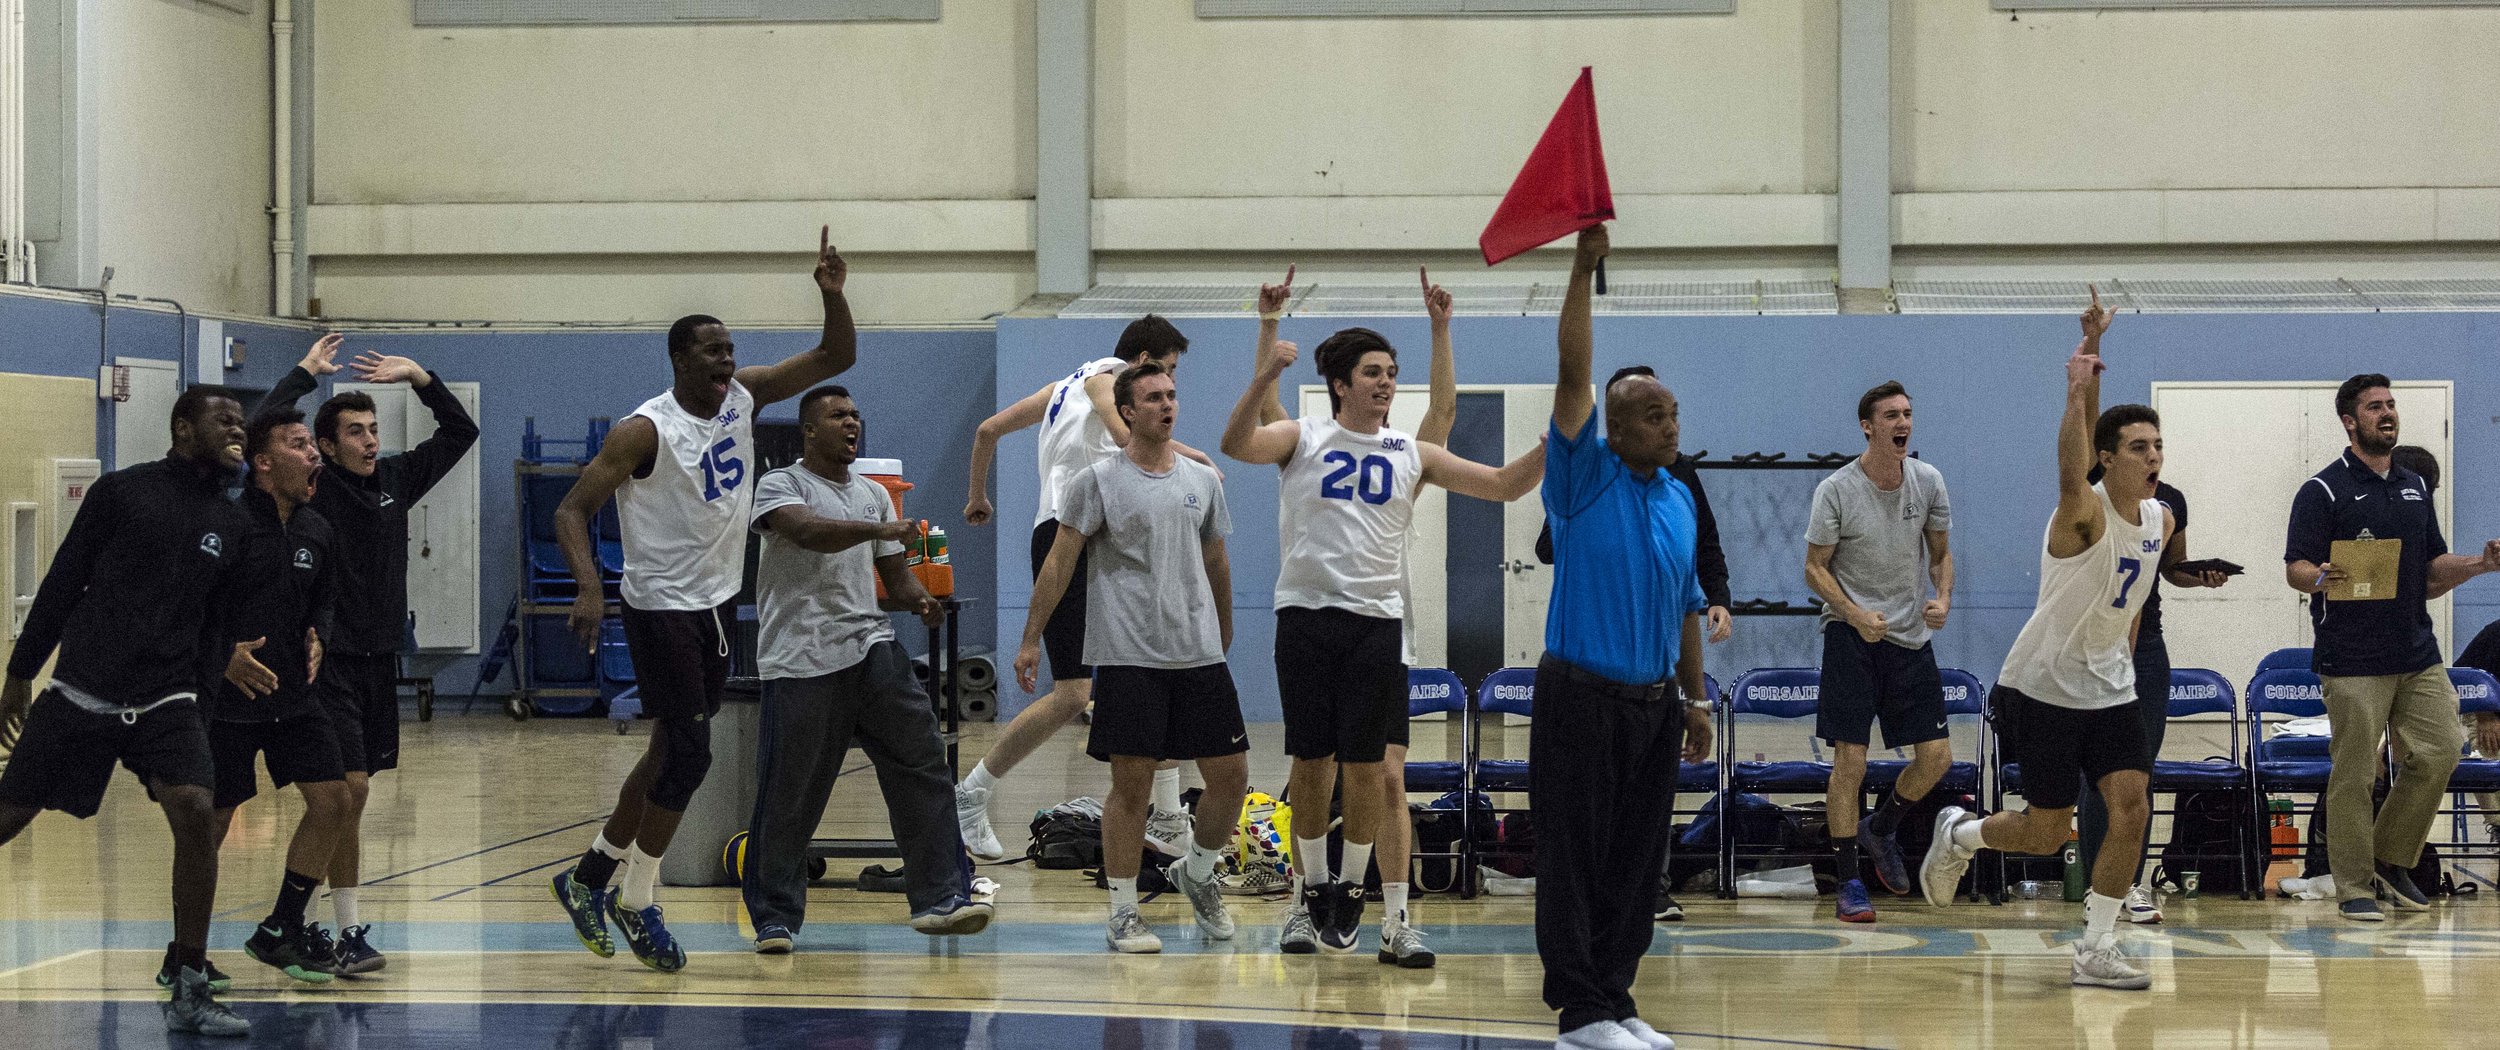  The Santa Monica Corsairs bench celebrates their match winning point (3-2) against The Pierce College Brahmas in the Santa Monica College gymnasium in Santa Monica Calif., on Friday, April 21 2017. The Corsairs however would go on to win the game 3-